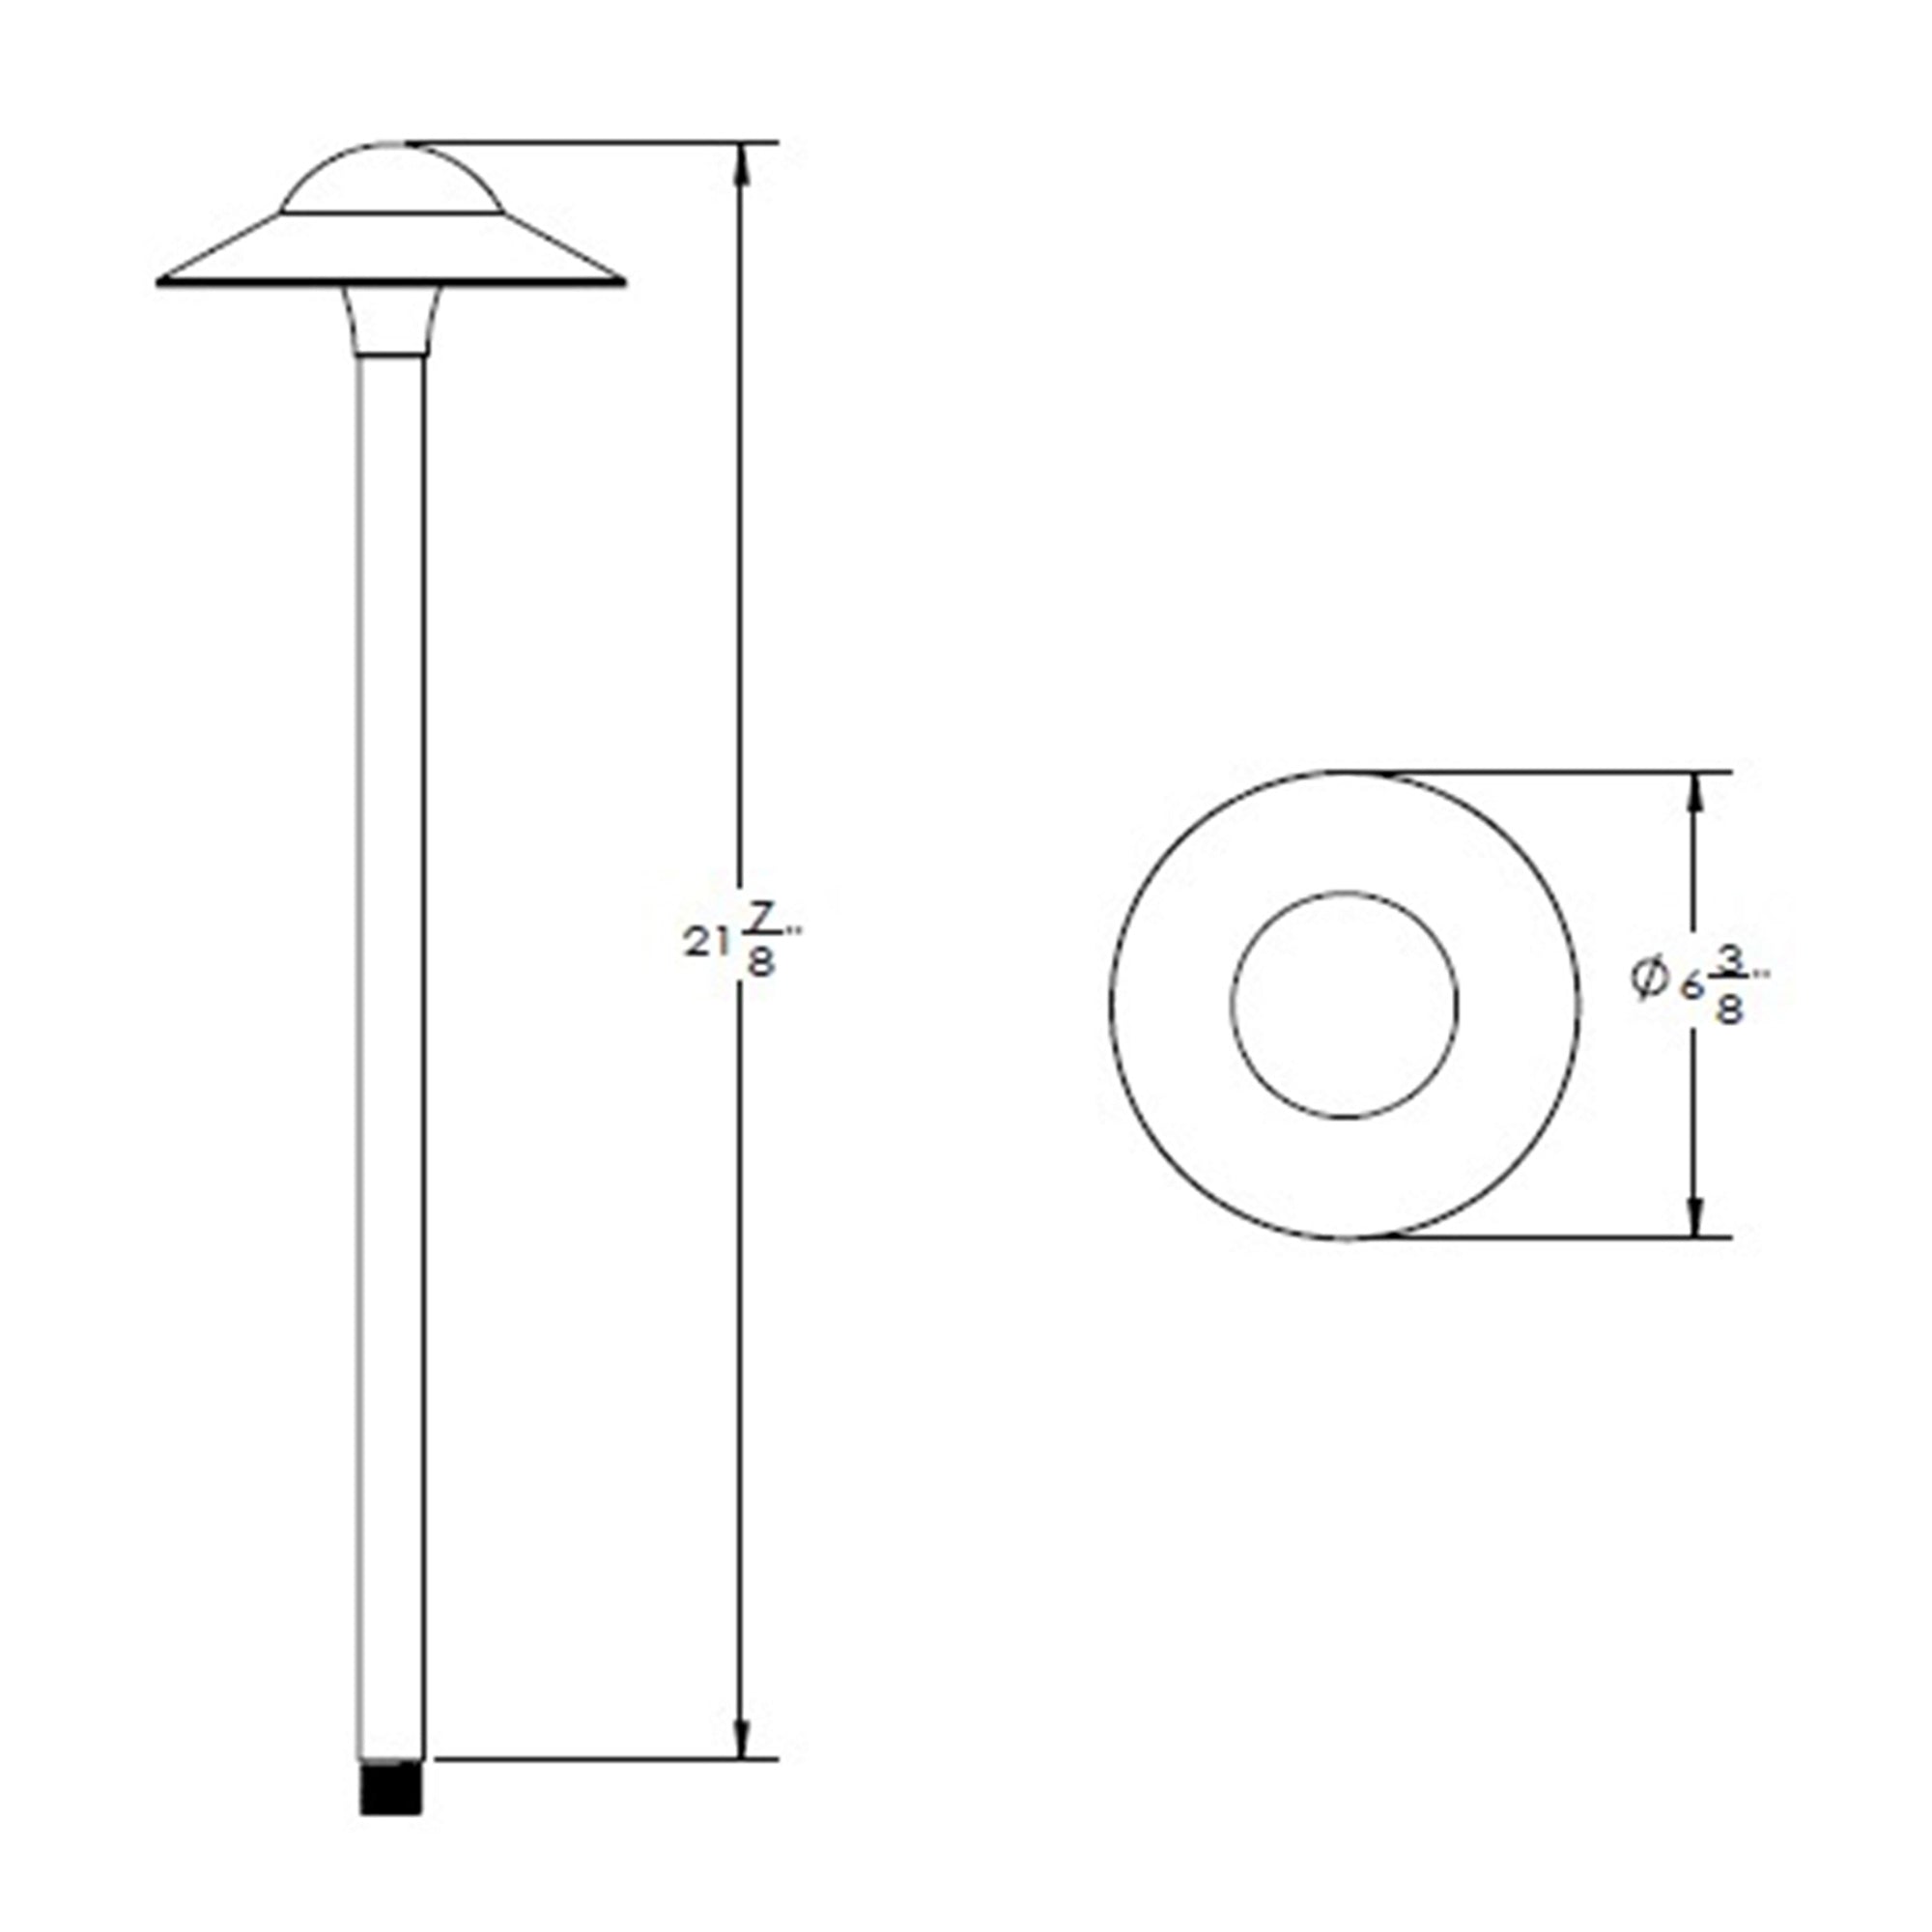 Canopy LED 12V Path and Area Light with 6.5" Round Cap